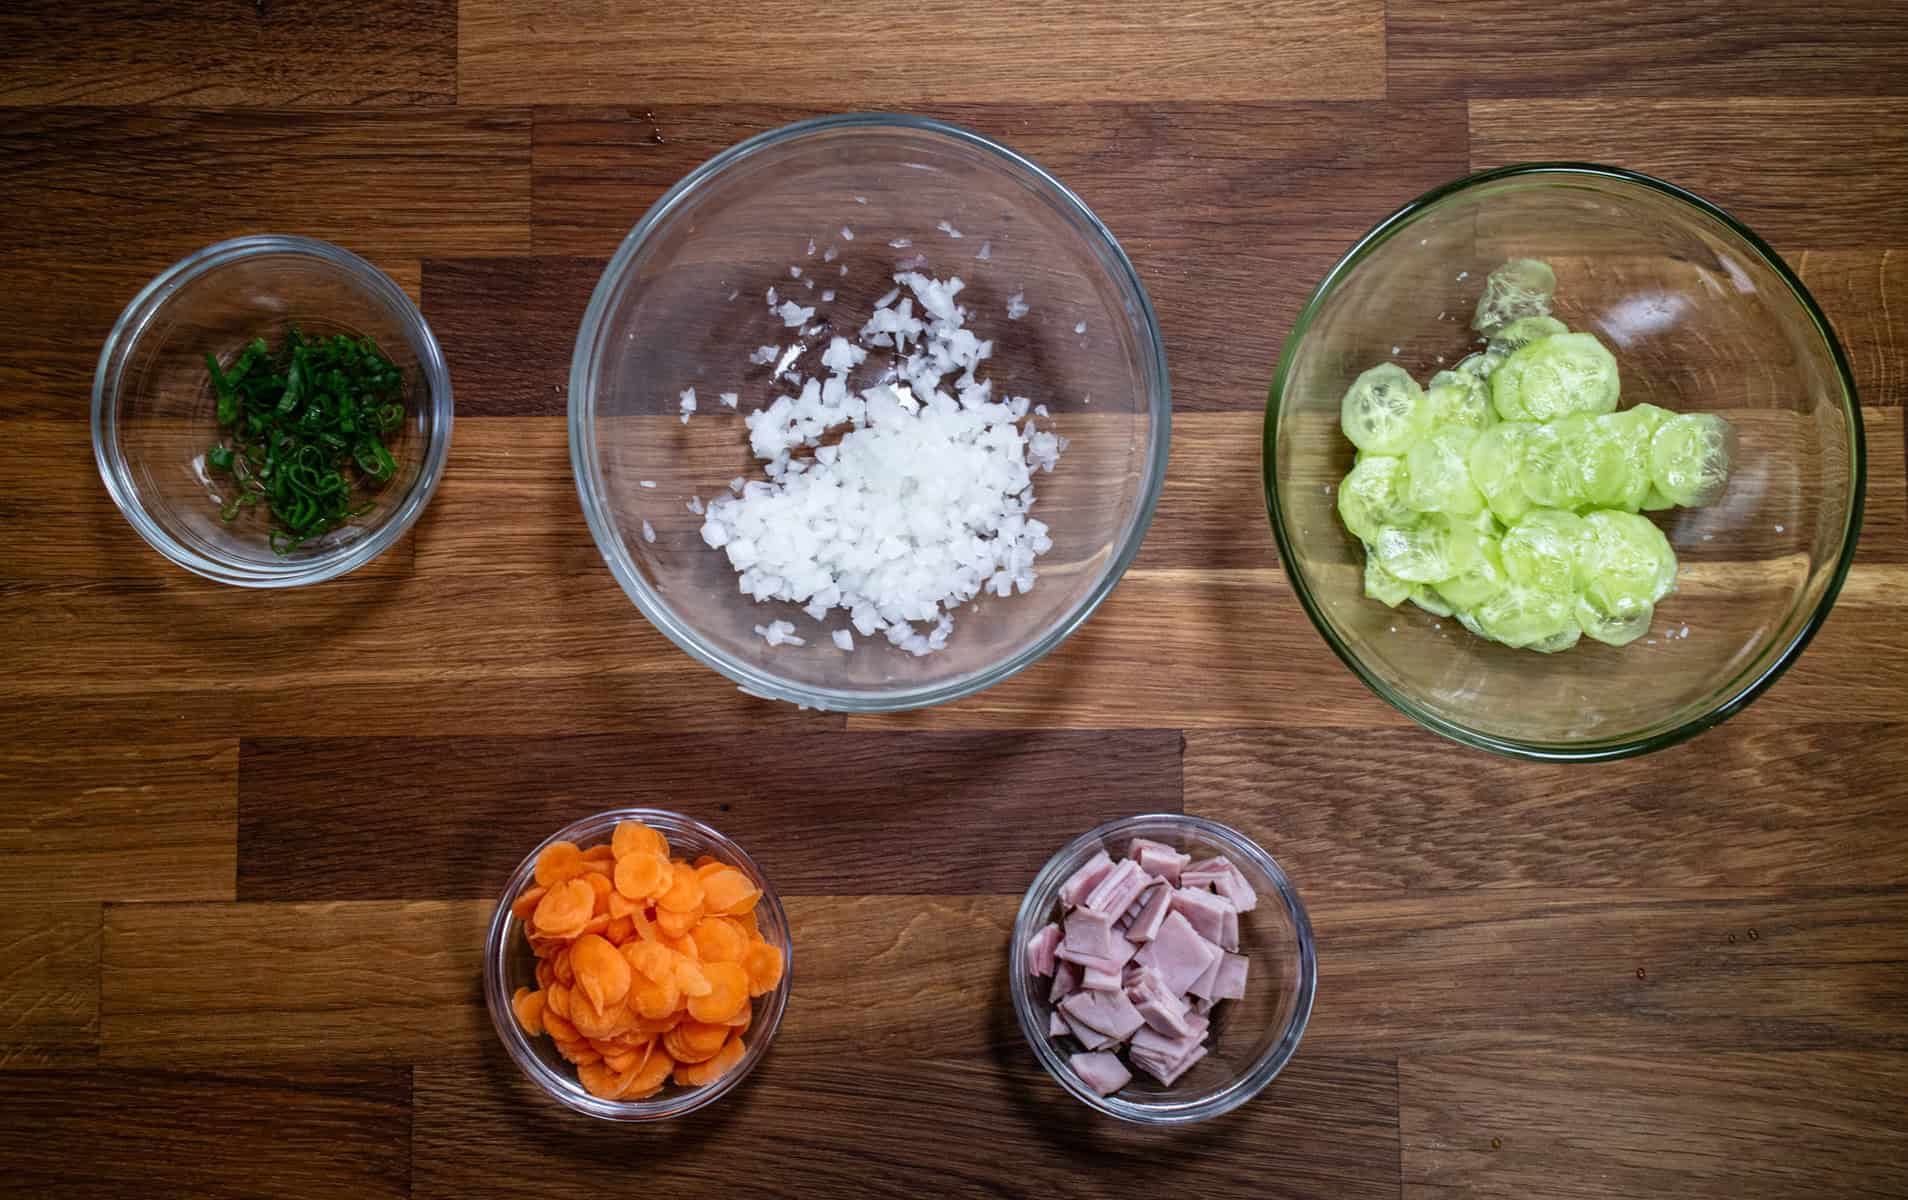 diced and sliced ingredients